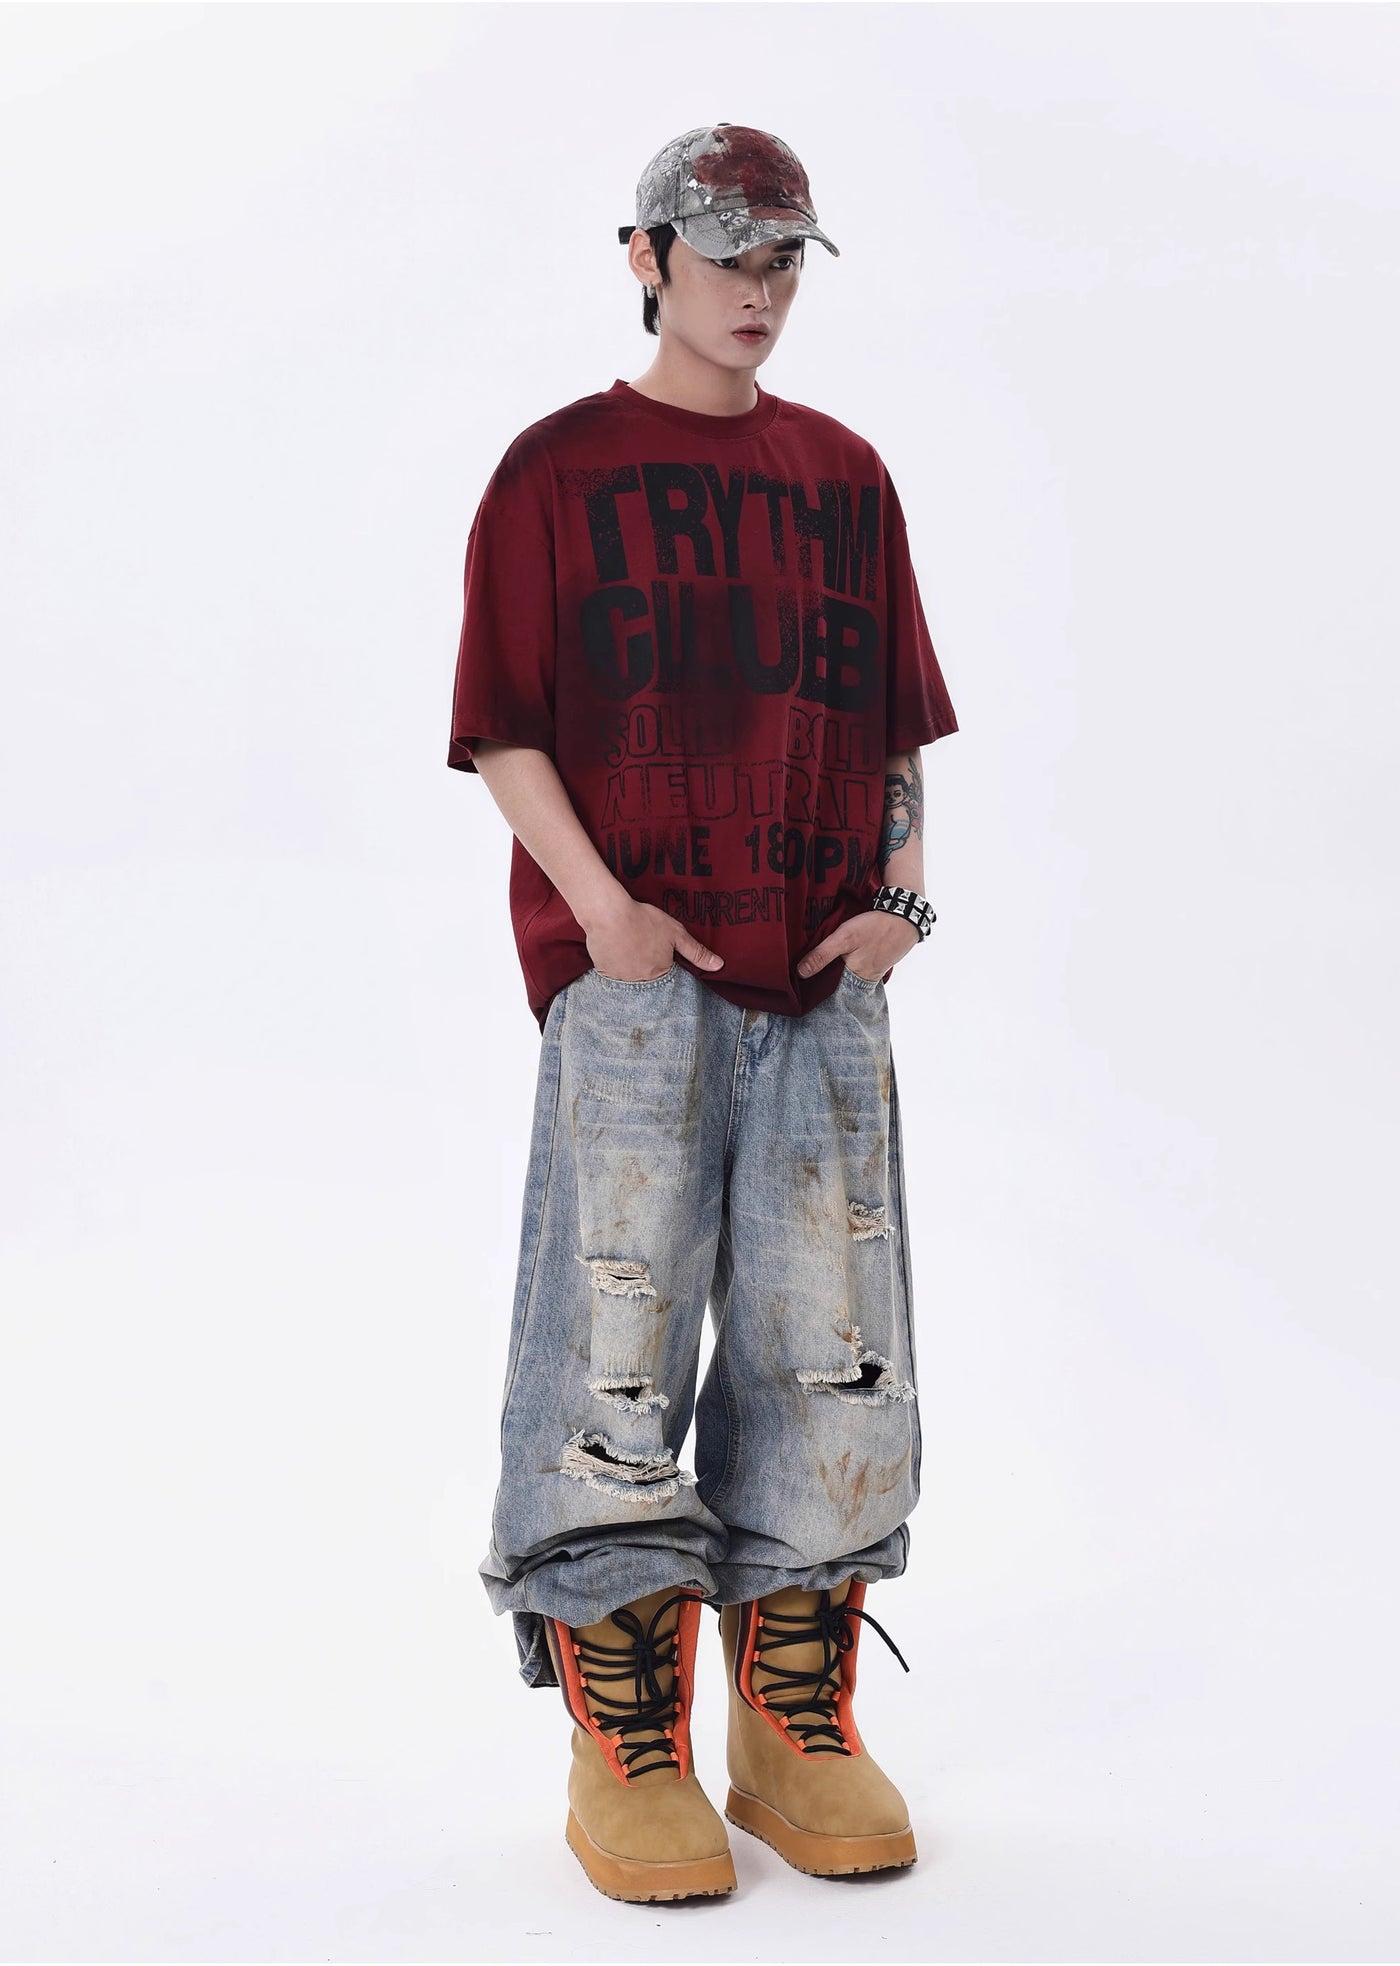 [BTSG] Middle distressed dull paint design wide silhouette denim pants BS0019